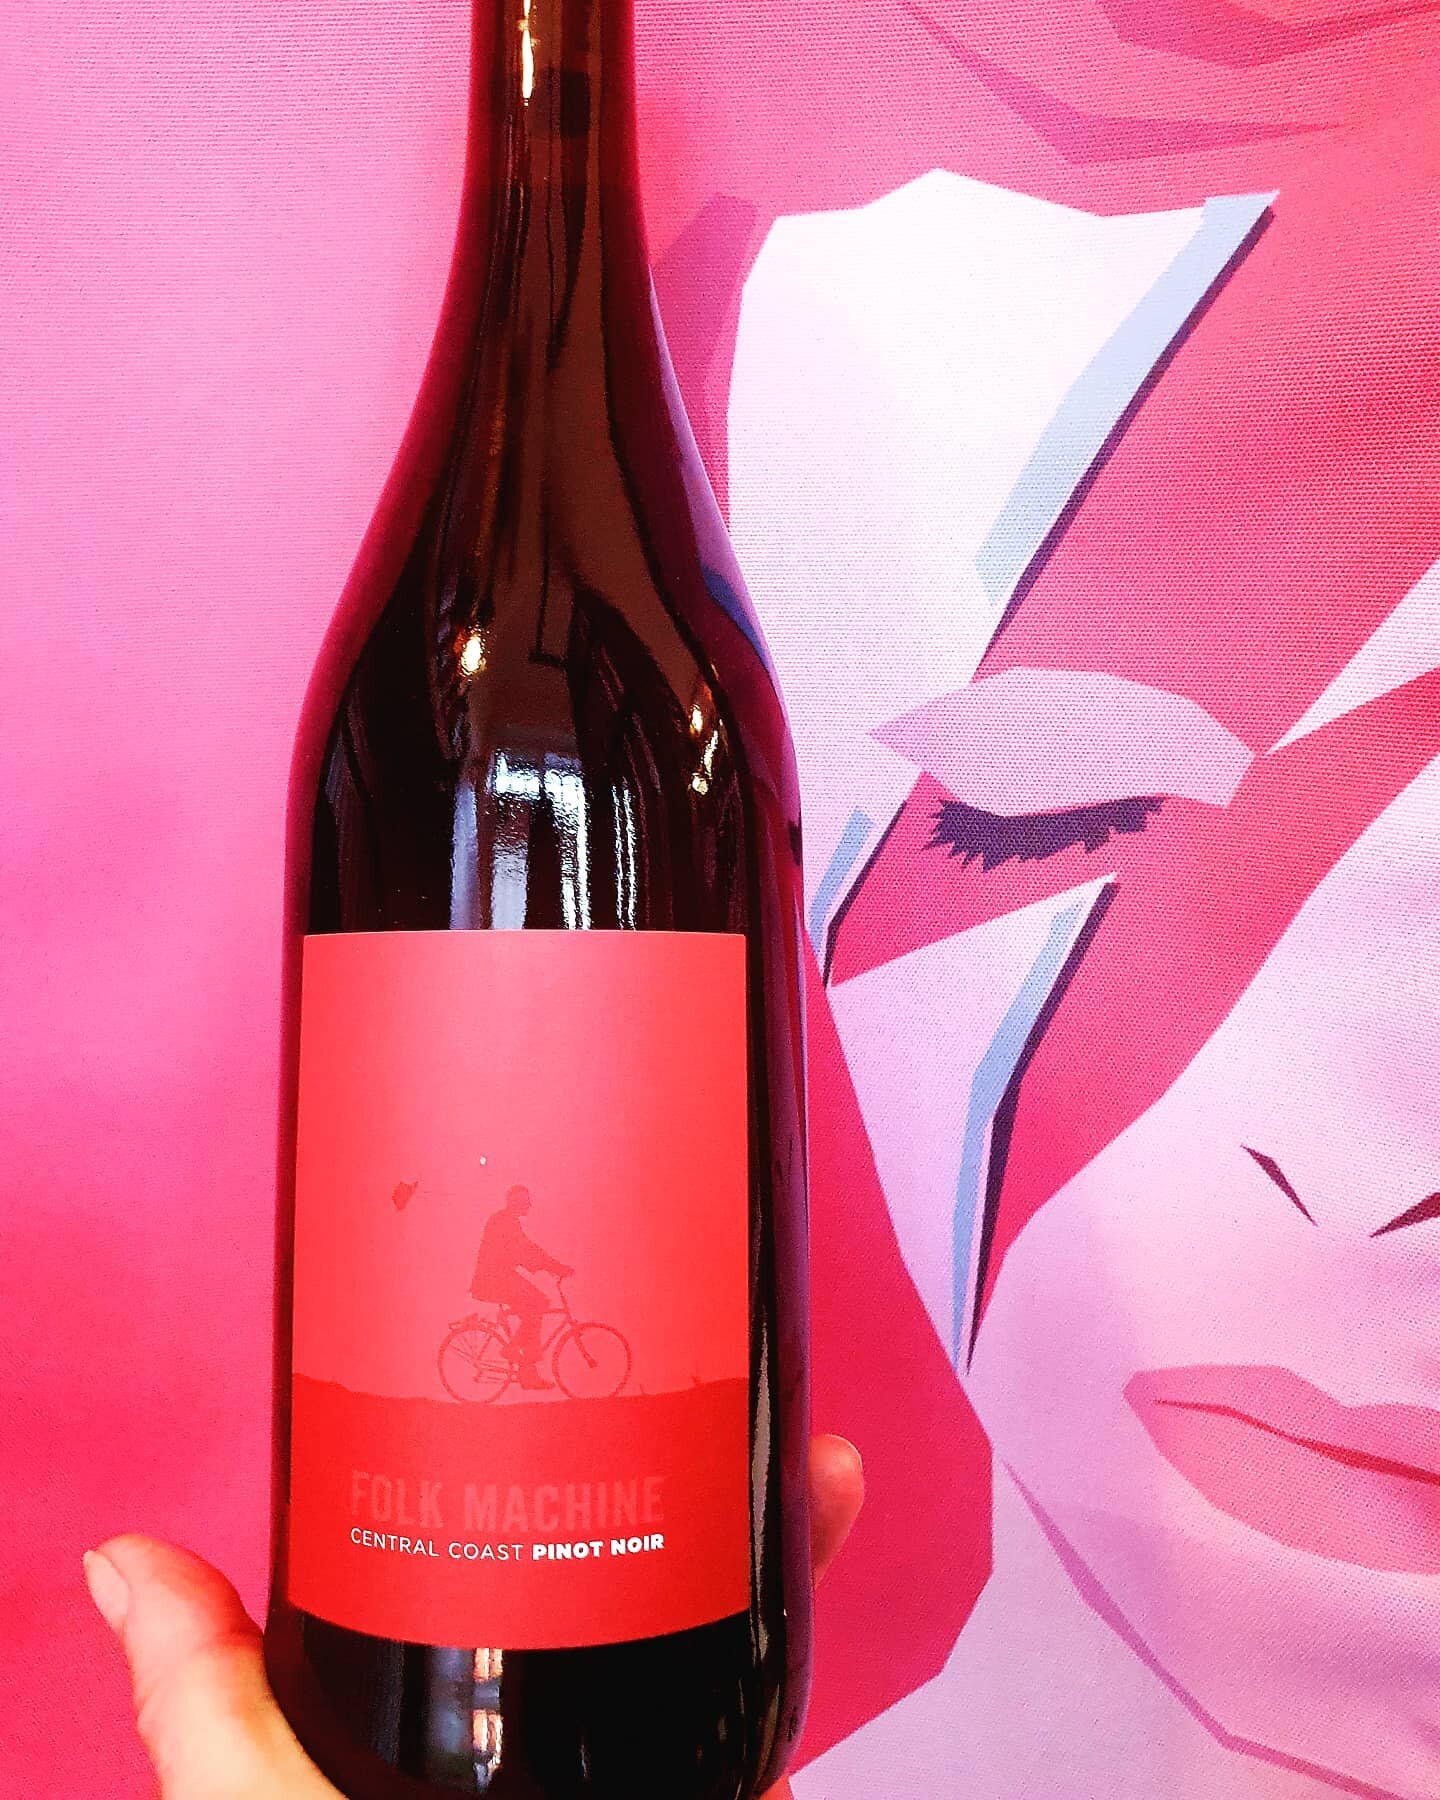 This Folk Machine Pinot Noir is light in weight and colour with relaxed tannins and medium acid. It is very lively and fun but elegant and drinkable highlighting the silky more subtle side of the variety!

#anarchyofthedeckchair #pinotnoir #hobowine 